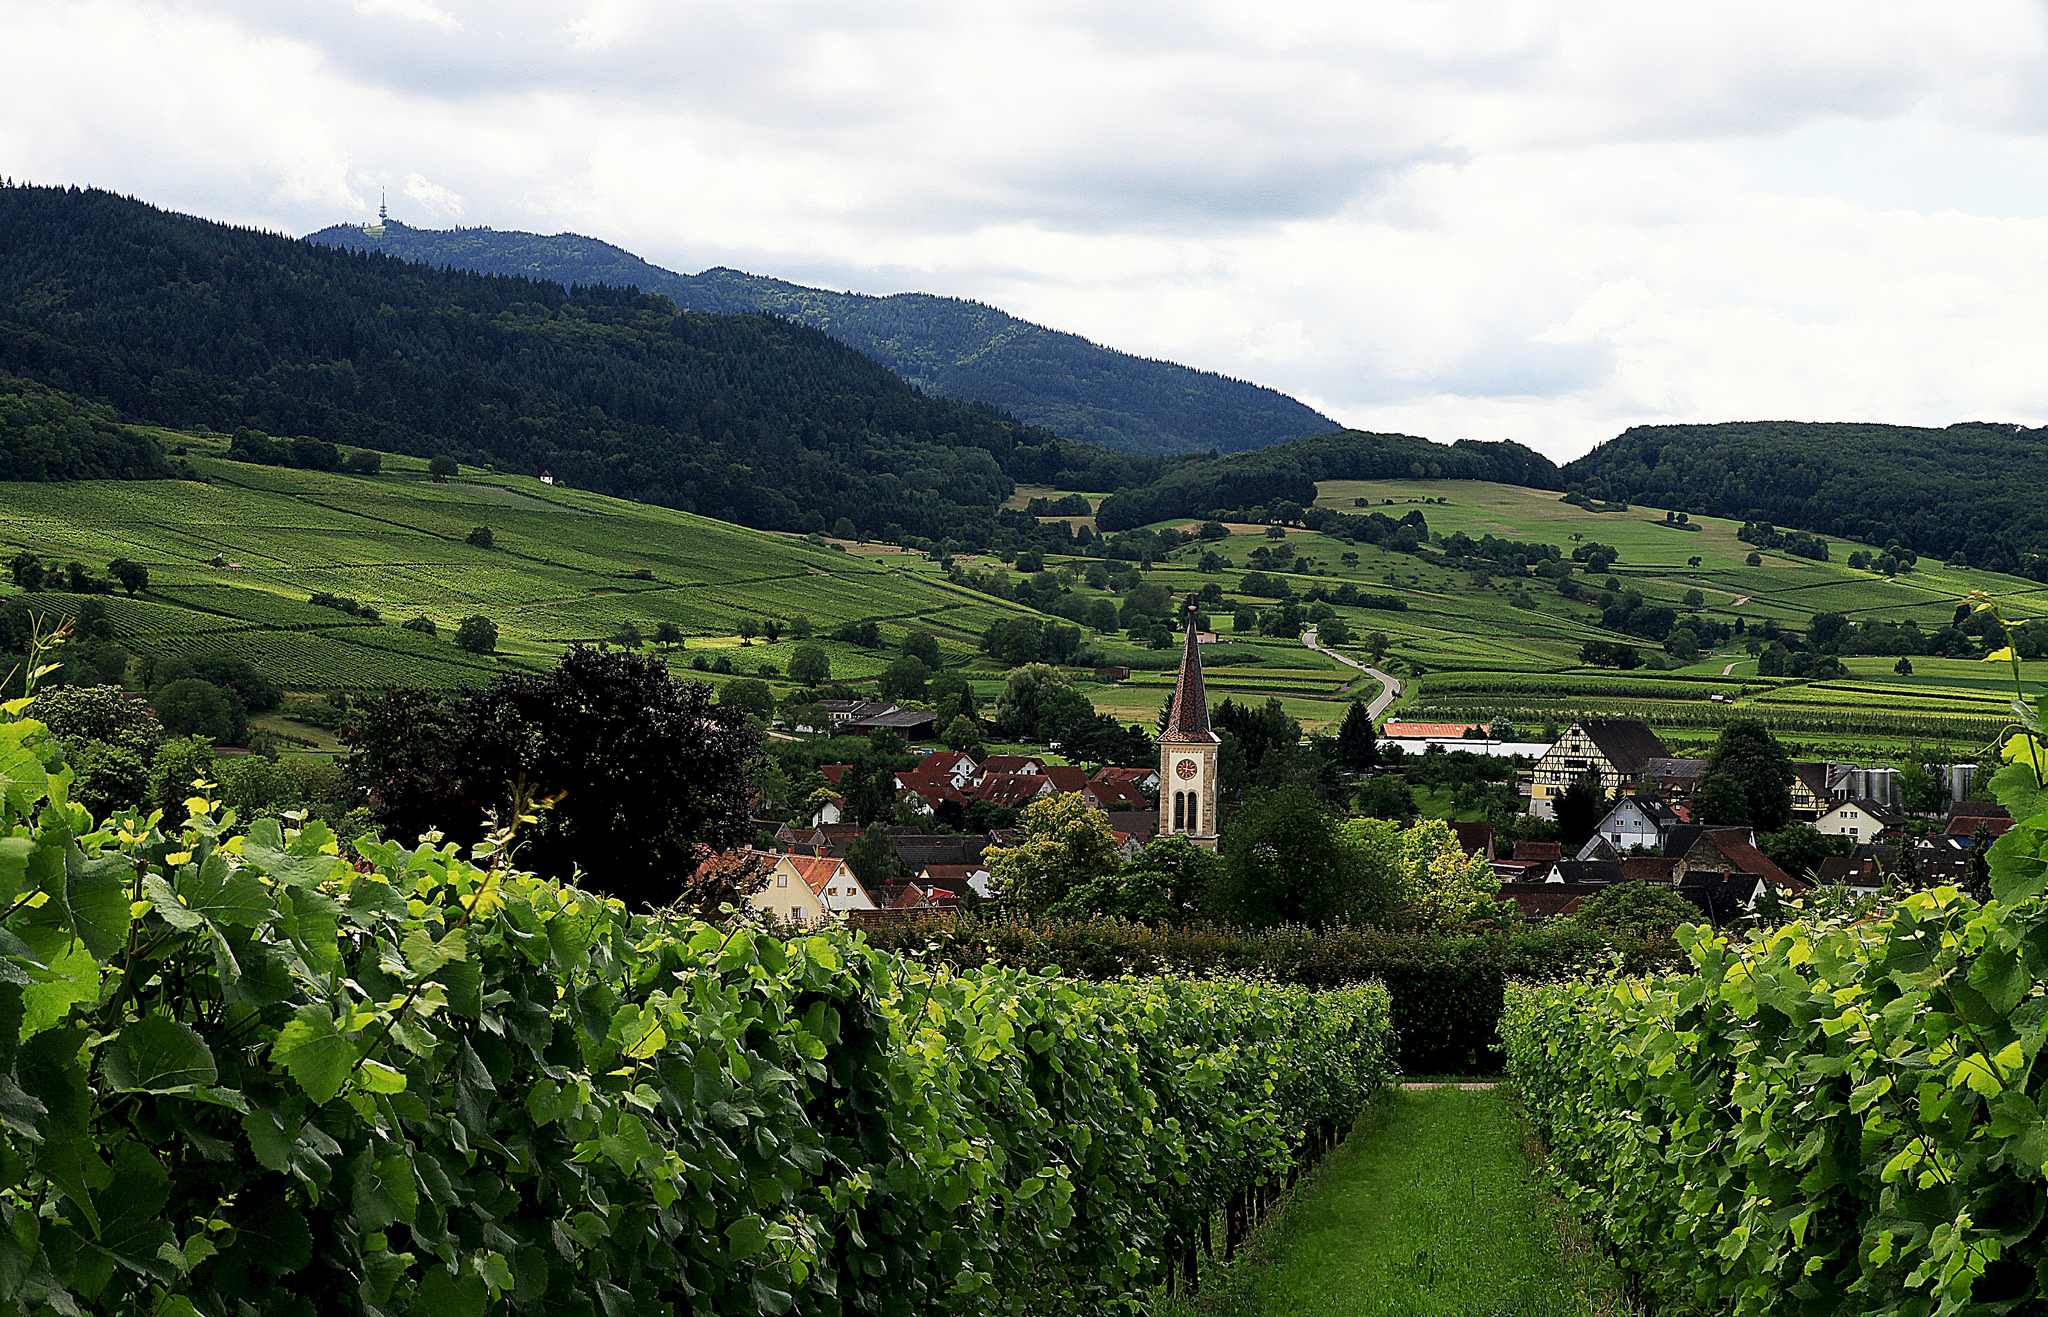 Village of Laufen, Rhine Valley, Germany. Image: Flickr user Peter Rintels (CC BY-ND 2.0)